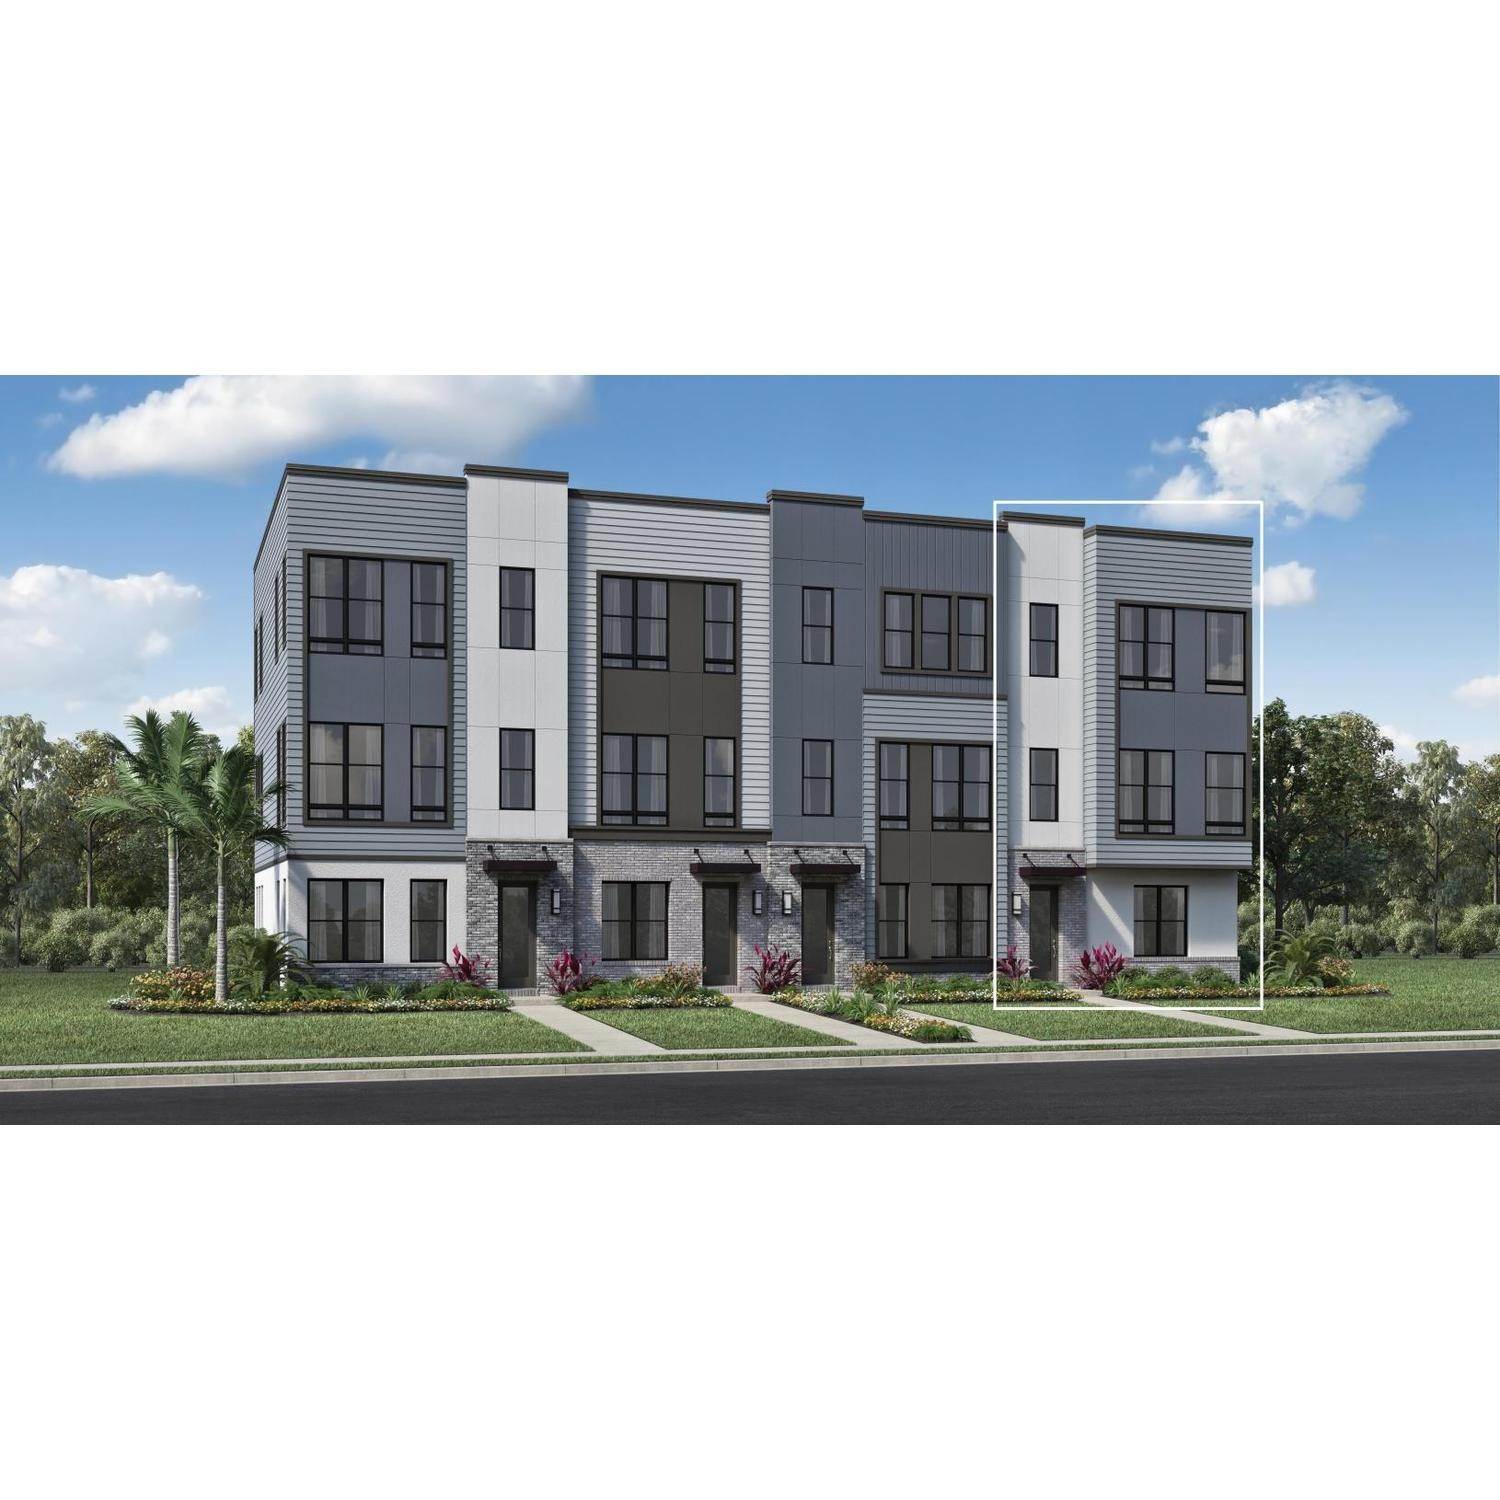 Multi Family for Sale at The Brix At The Packing District - Nova Elite Princeton St. And John Young Parkway ORLANDO, FLORIDA 32804 UNITED STATES